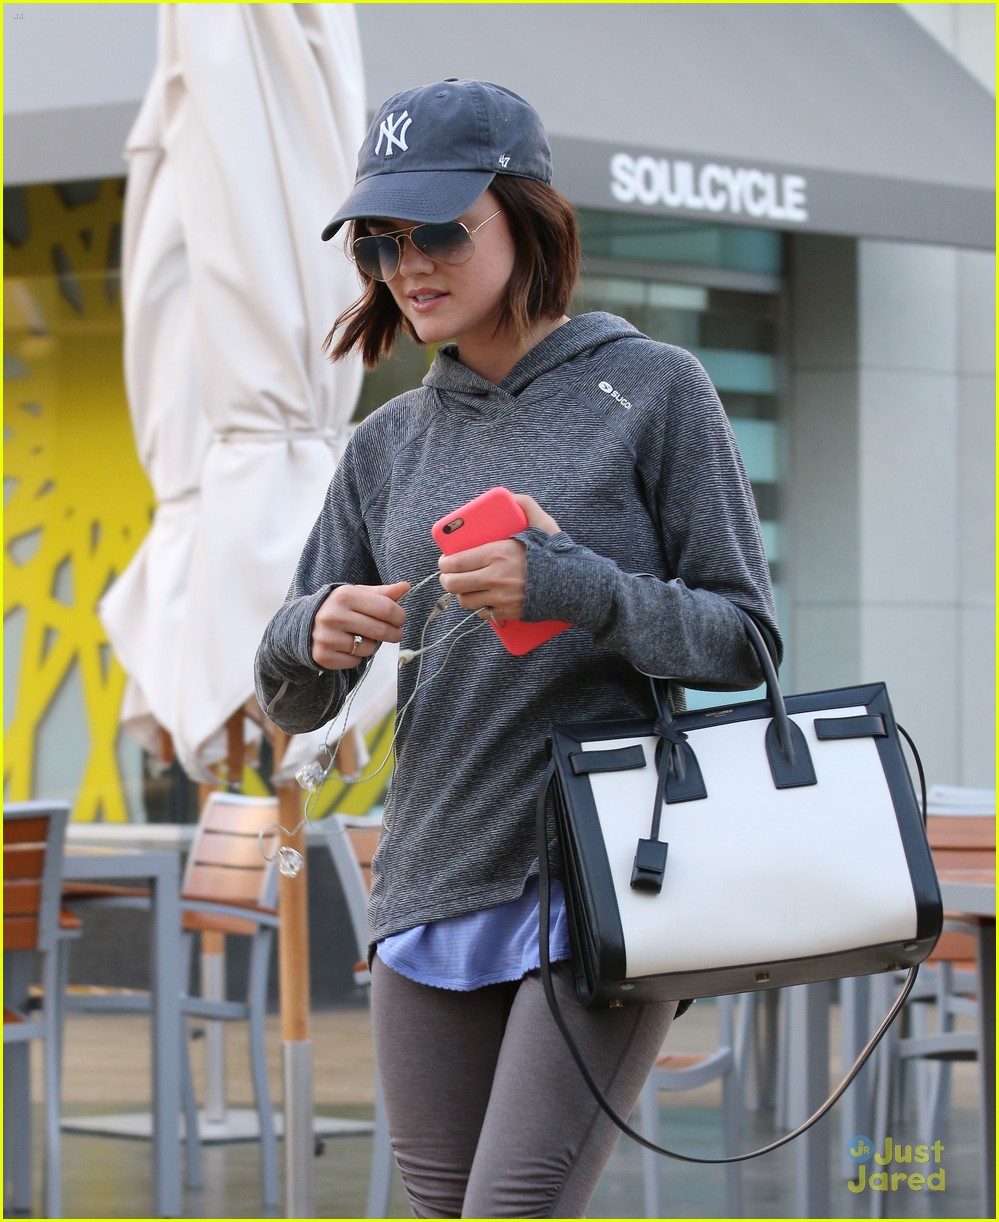 lucy hale equinox gym sky diving 19